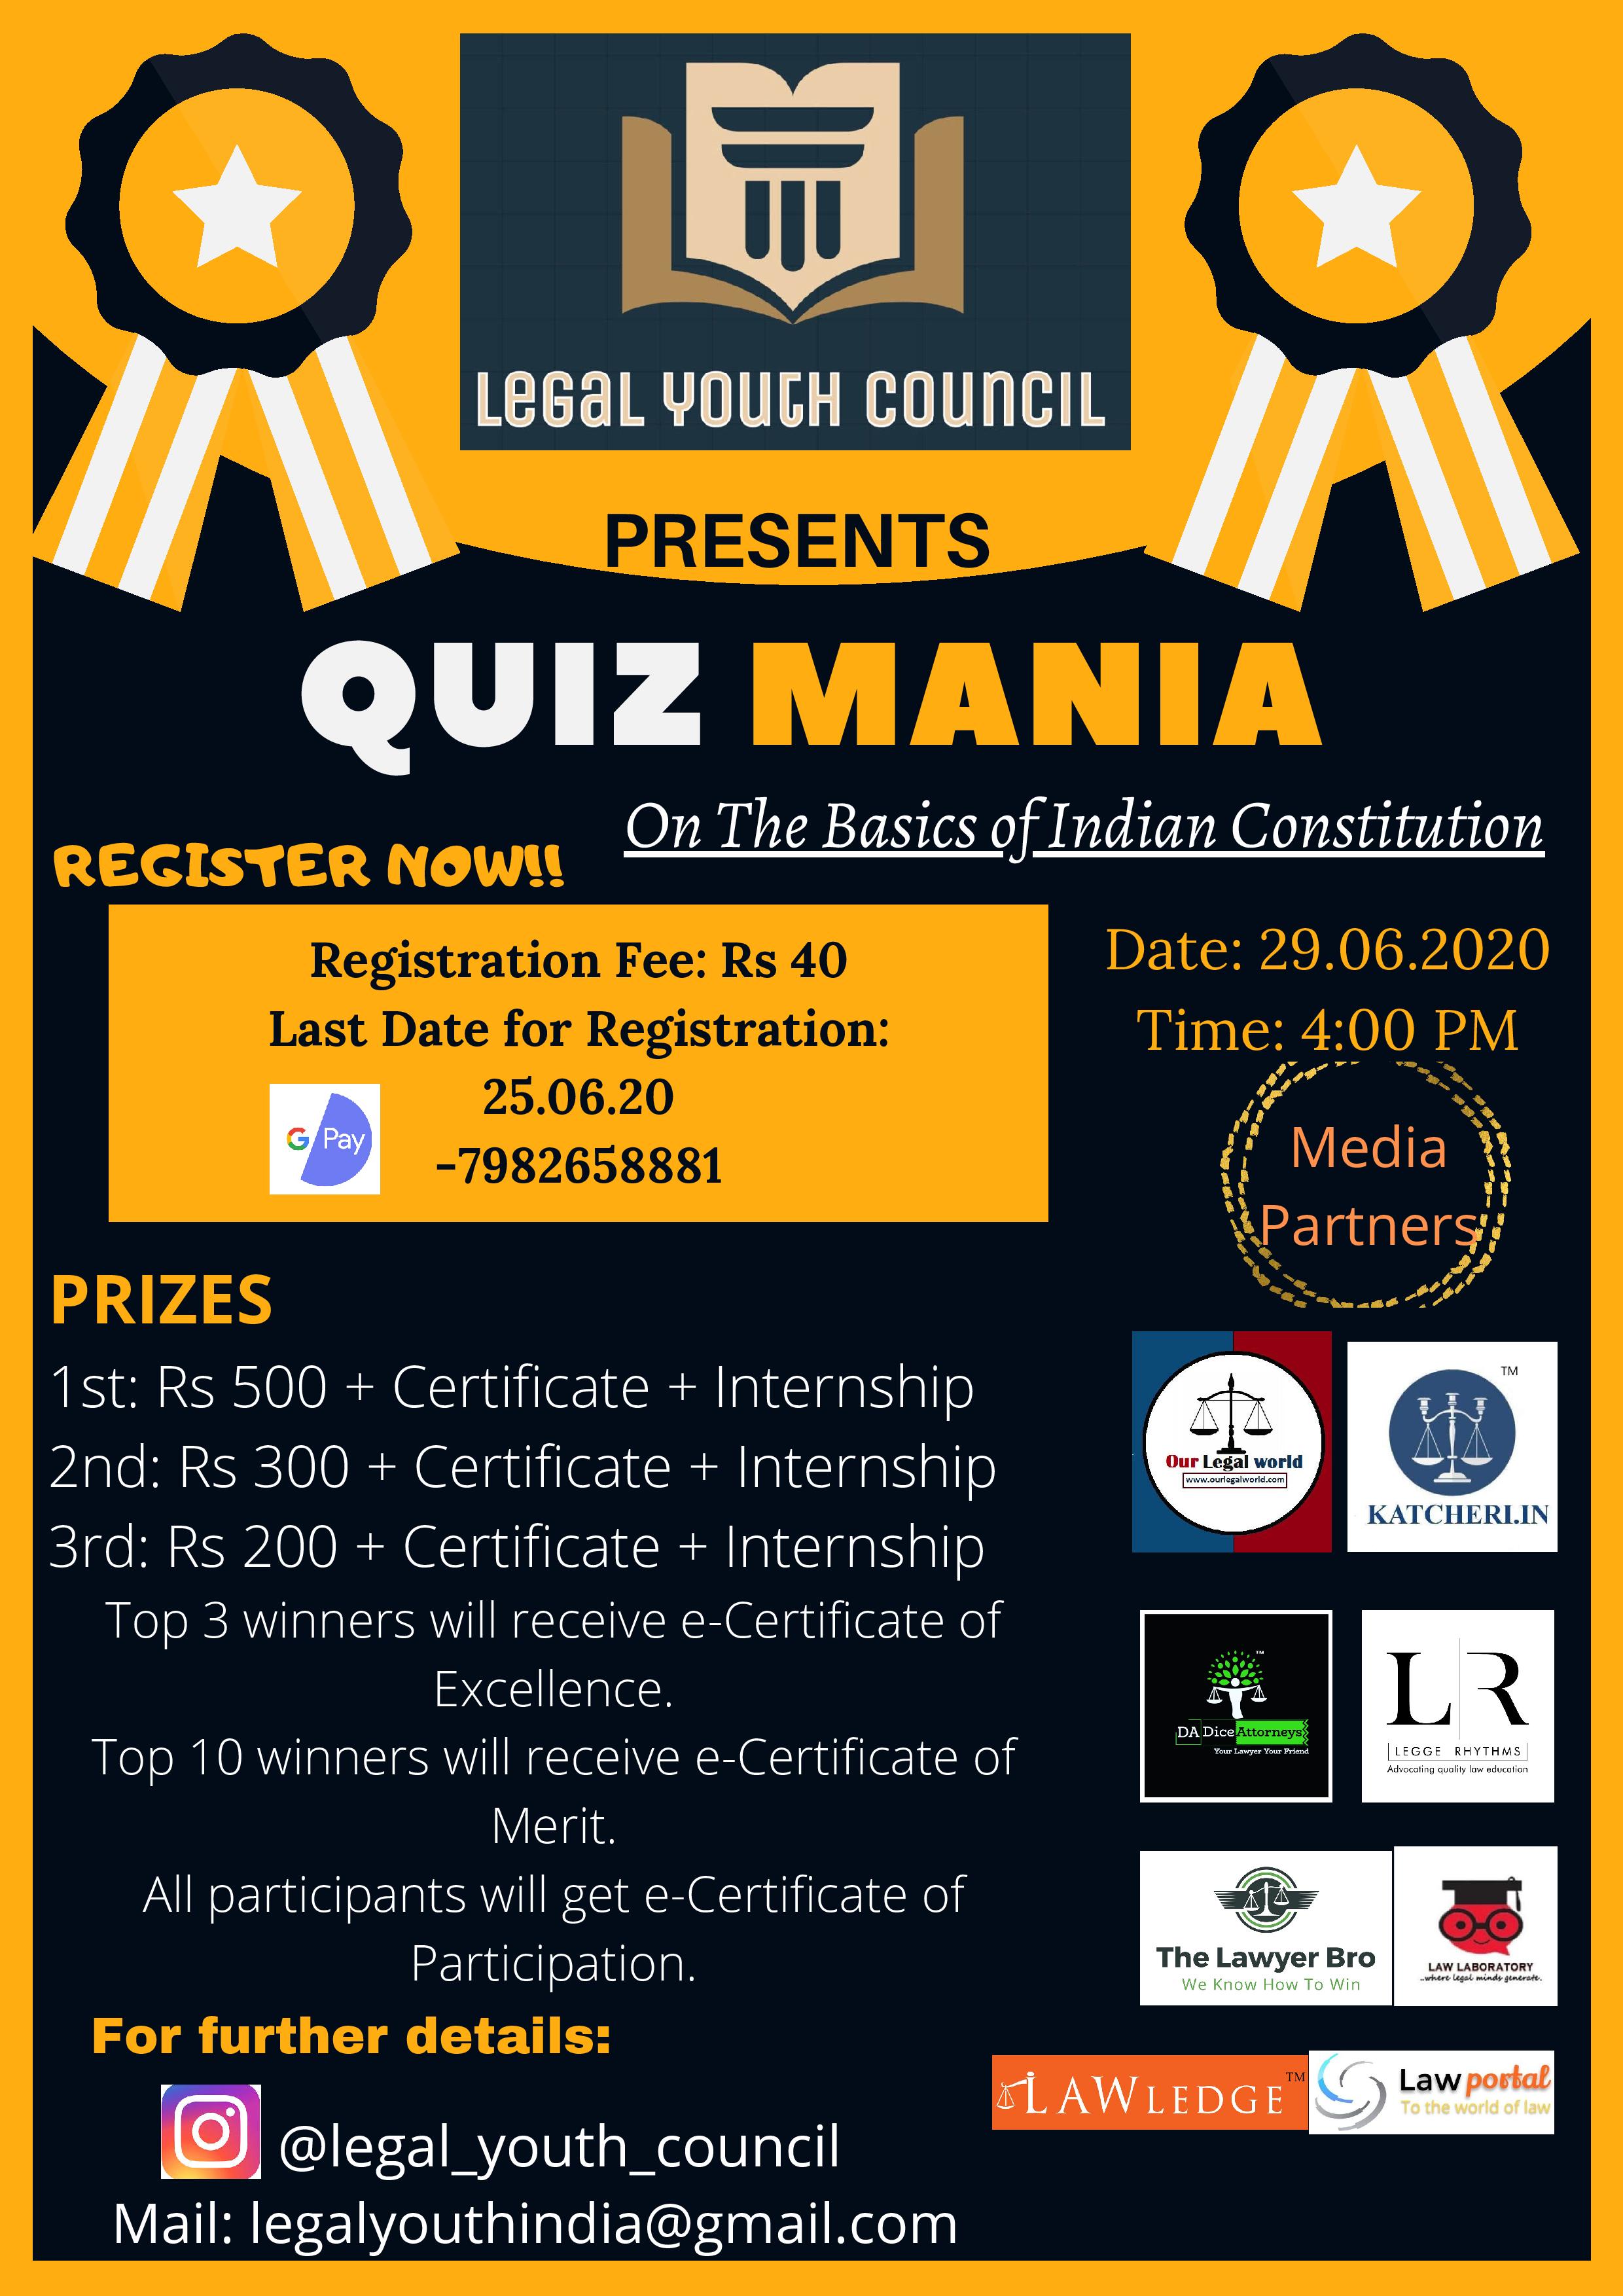 LEGAL YOUTH COUNCIL'S QUIZ COMPETITION ON THE BASICS OF INDIAN CONSTITUTION